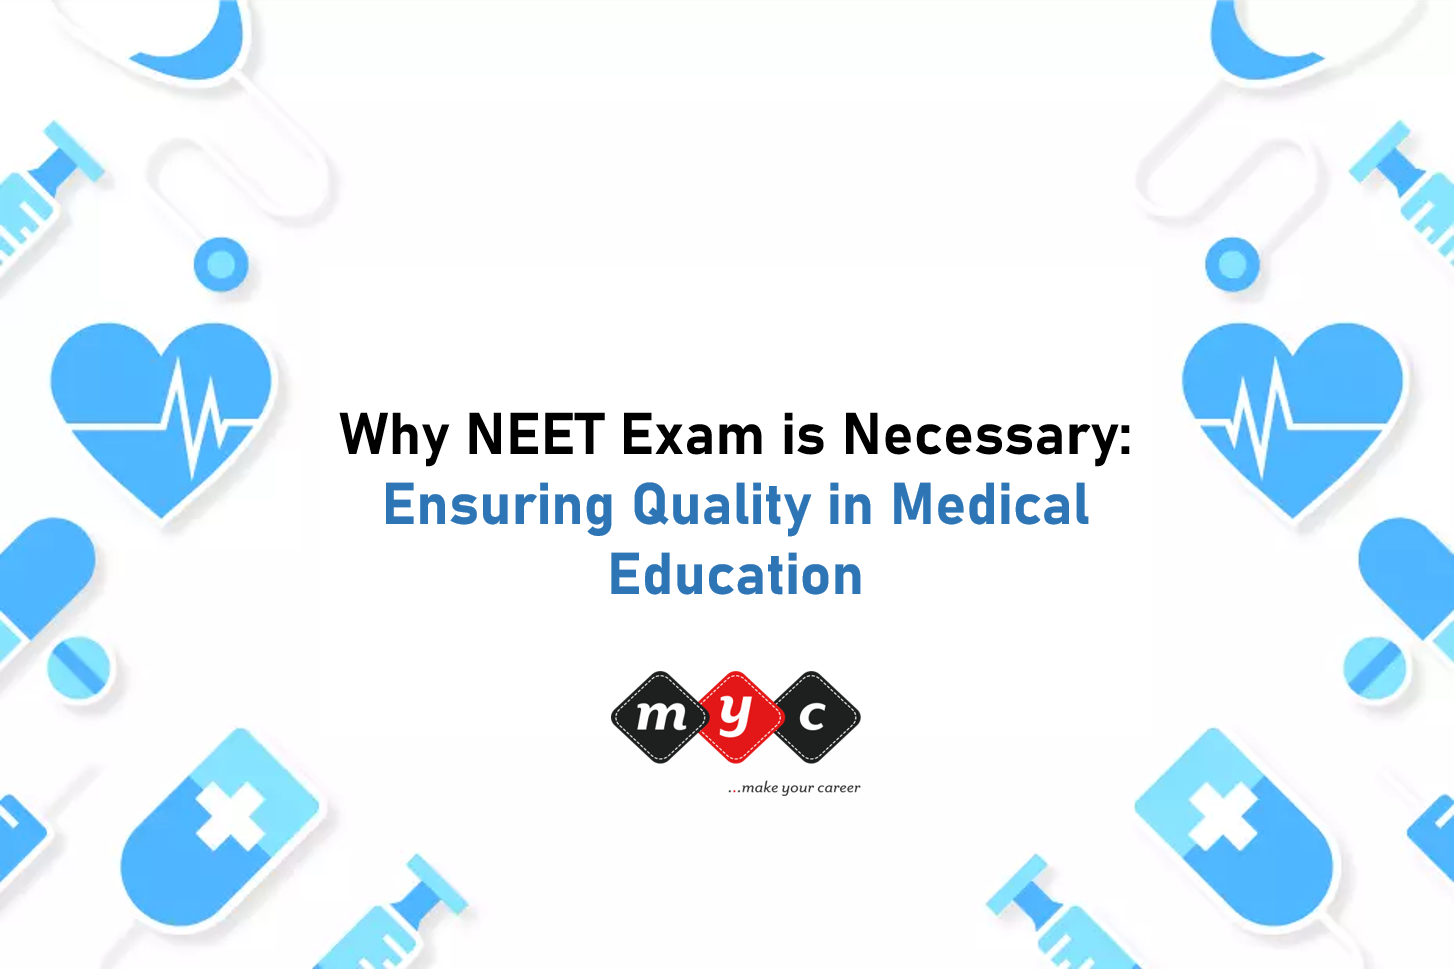 Why NEET Exam is Necessary: Ensuring Quality in Medical Education